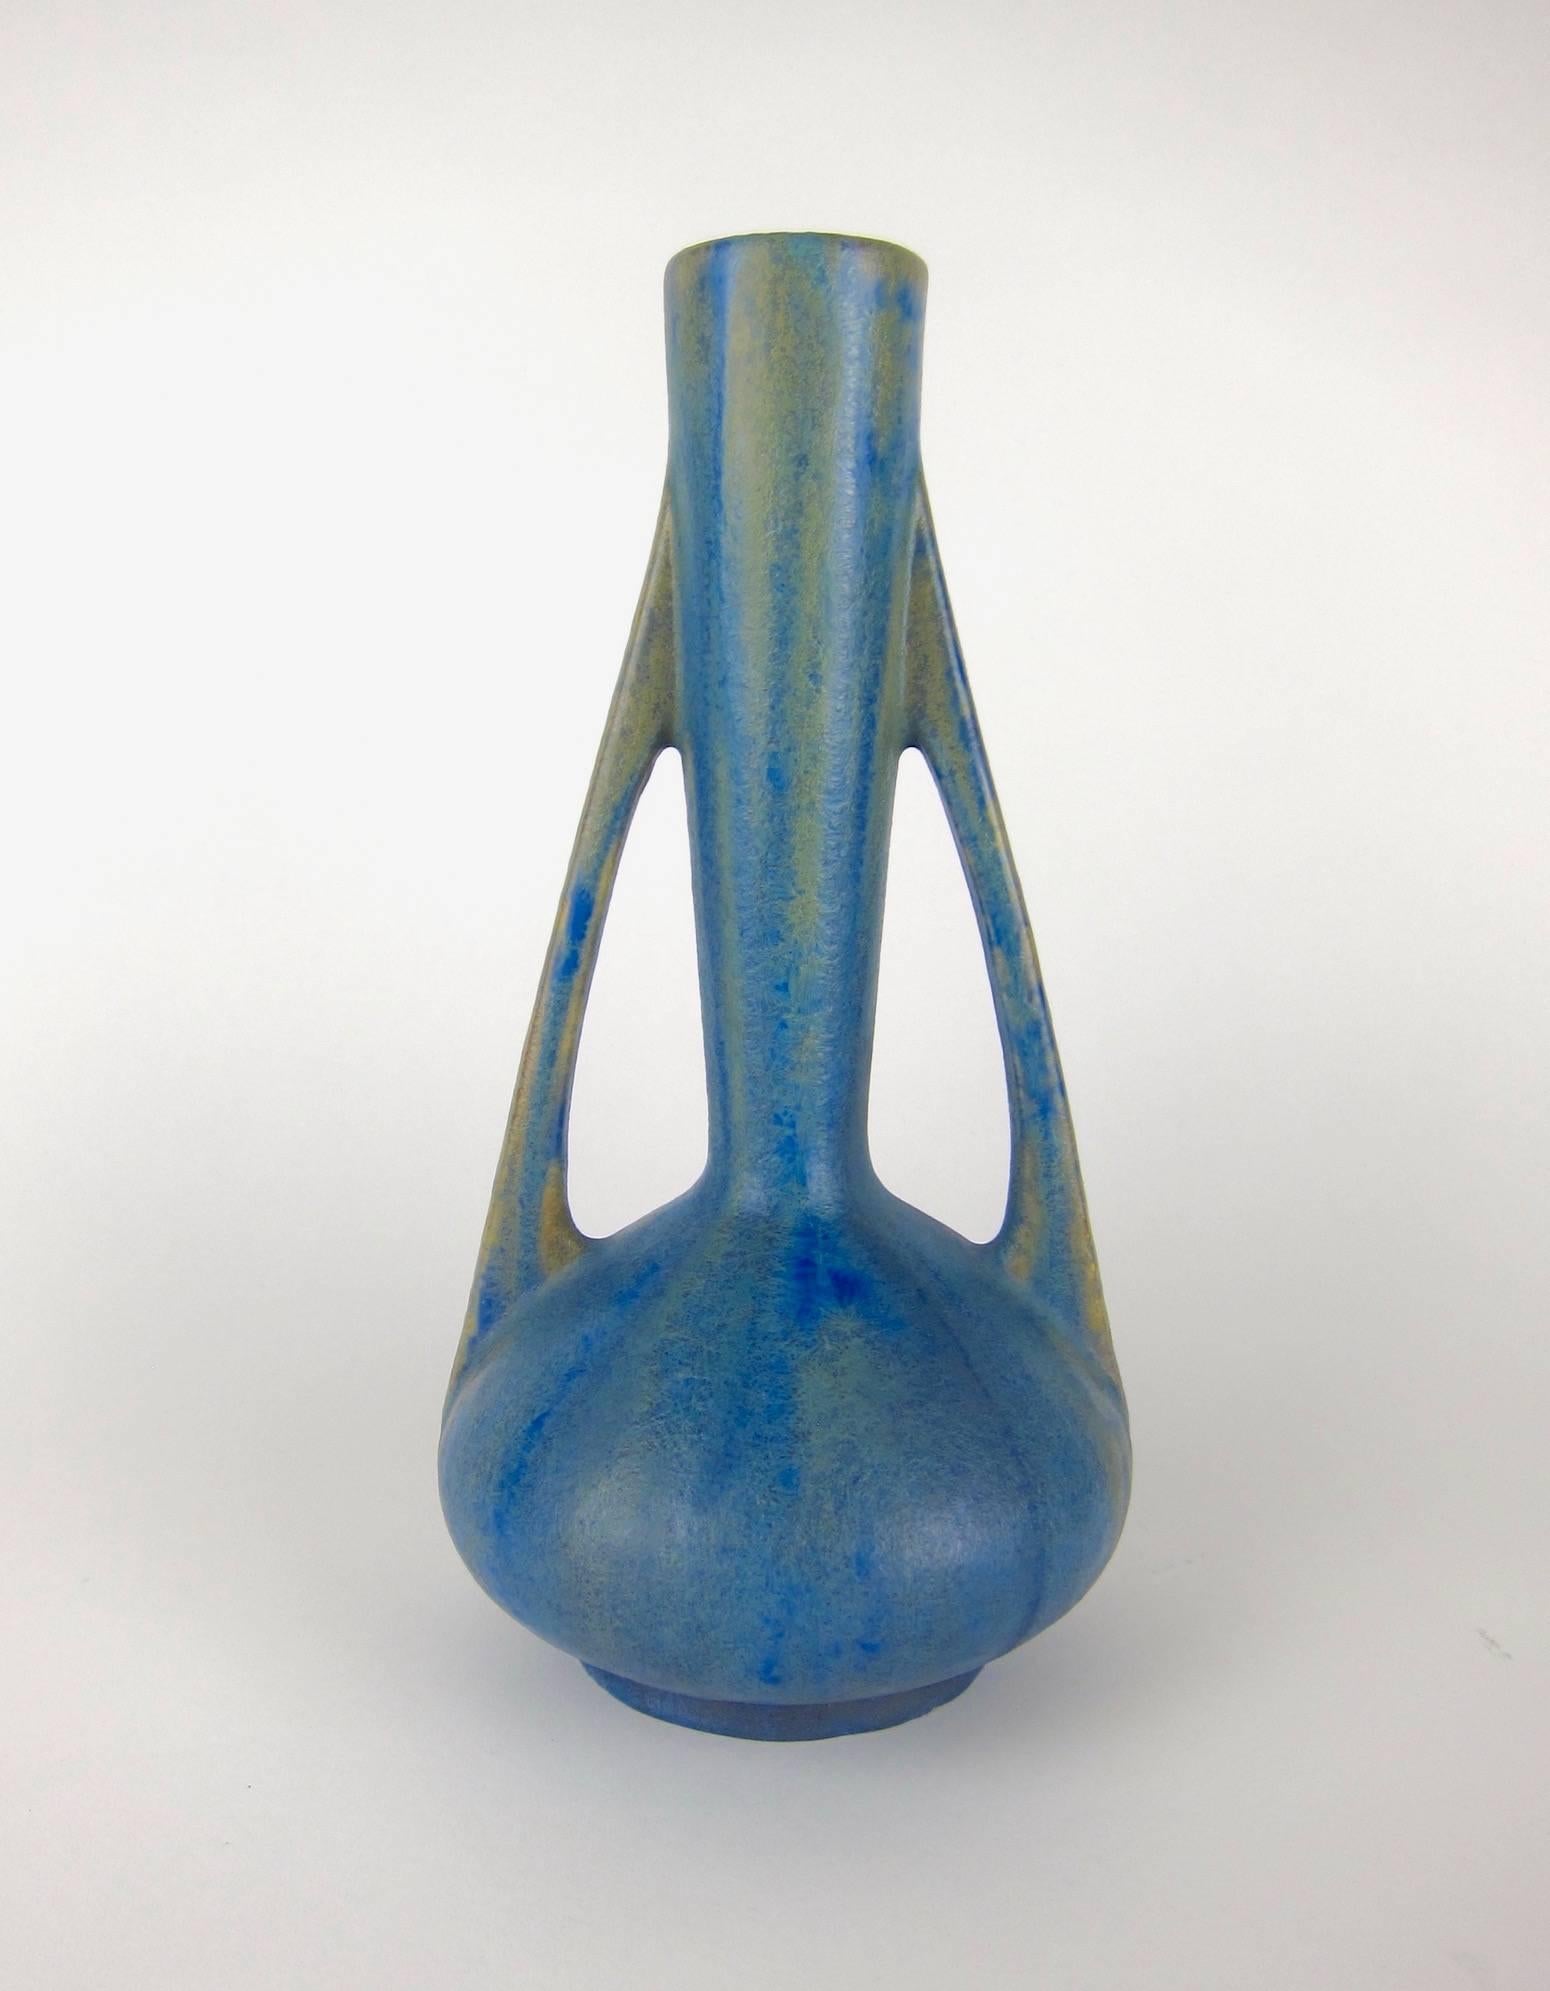 A superb turn of the 20th century Art Nouveau art pottery vase from Pierrefonds Pottery of France. The two-handled antique vessel dates circa 1905 and is decorated with a matte glaze of variegated shades of blue against a tan ground with blue